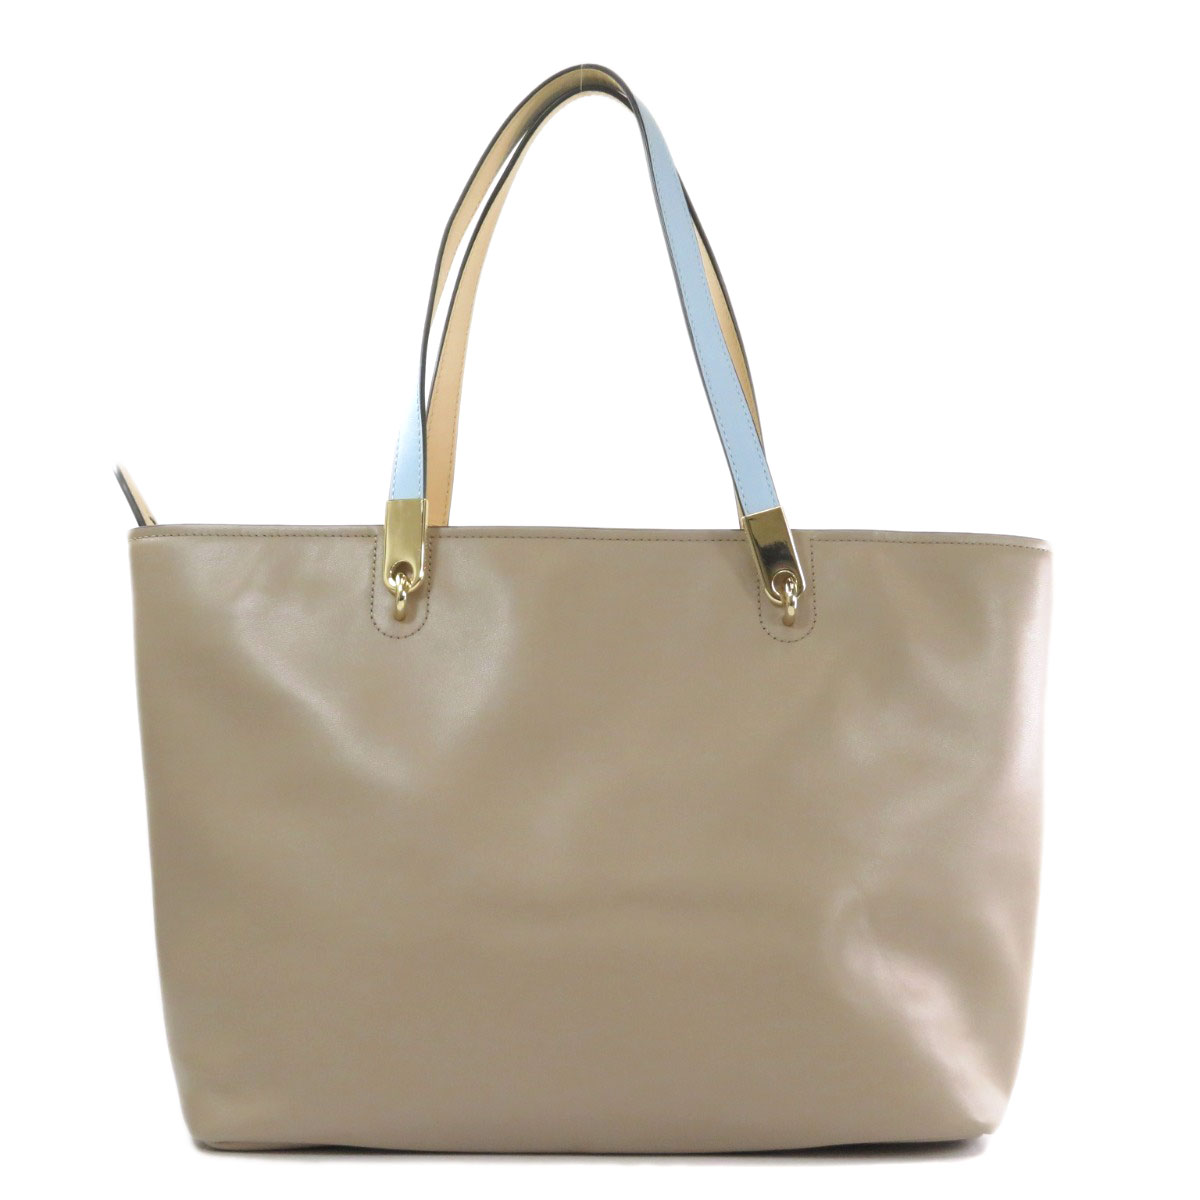 MARC BY MARC JACOBS Tote Bag By color Leather | eBay